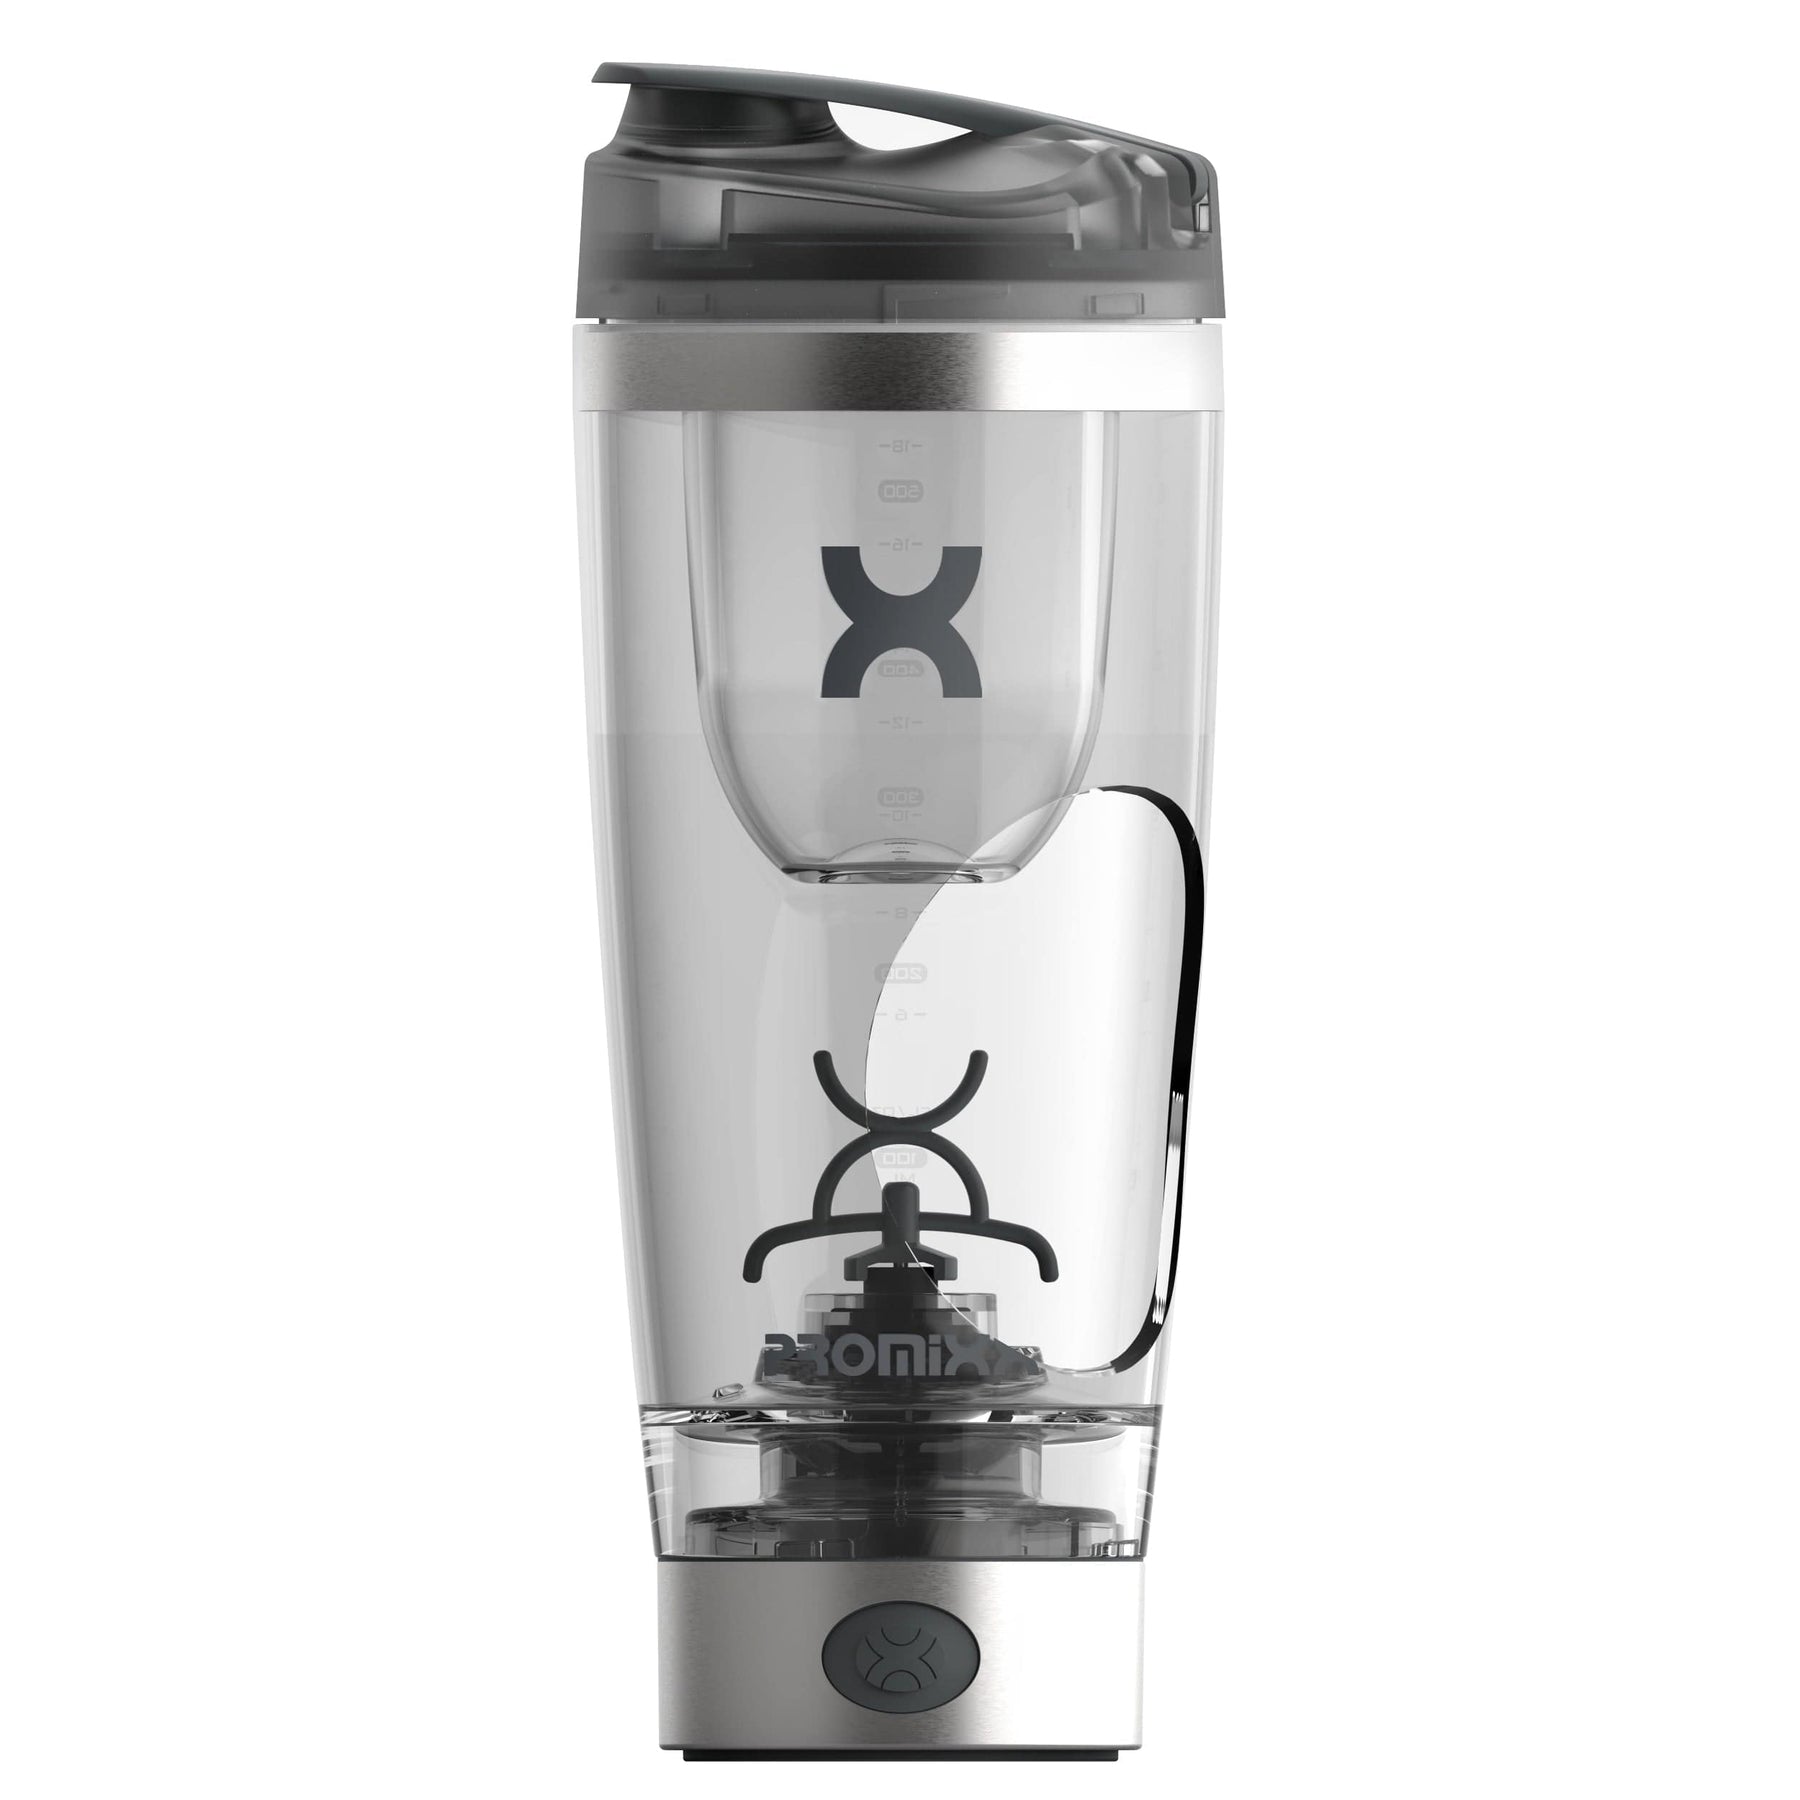 Promixx Pro Shaker Bottle | Rechargeable, Powerful for Smooth Protein Shakes | Includes Supplement Storage - BPA Free | 20oz Cup (Silver White/Gray)